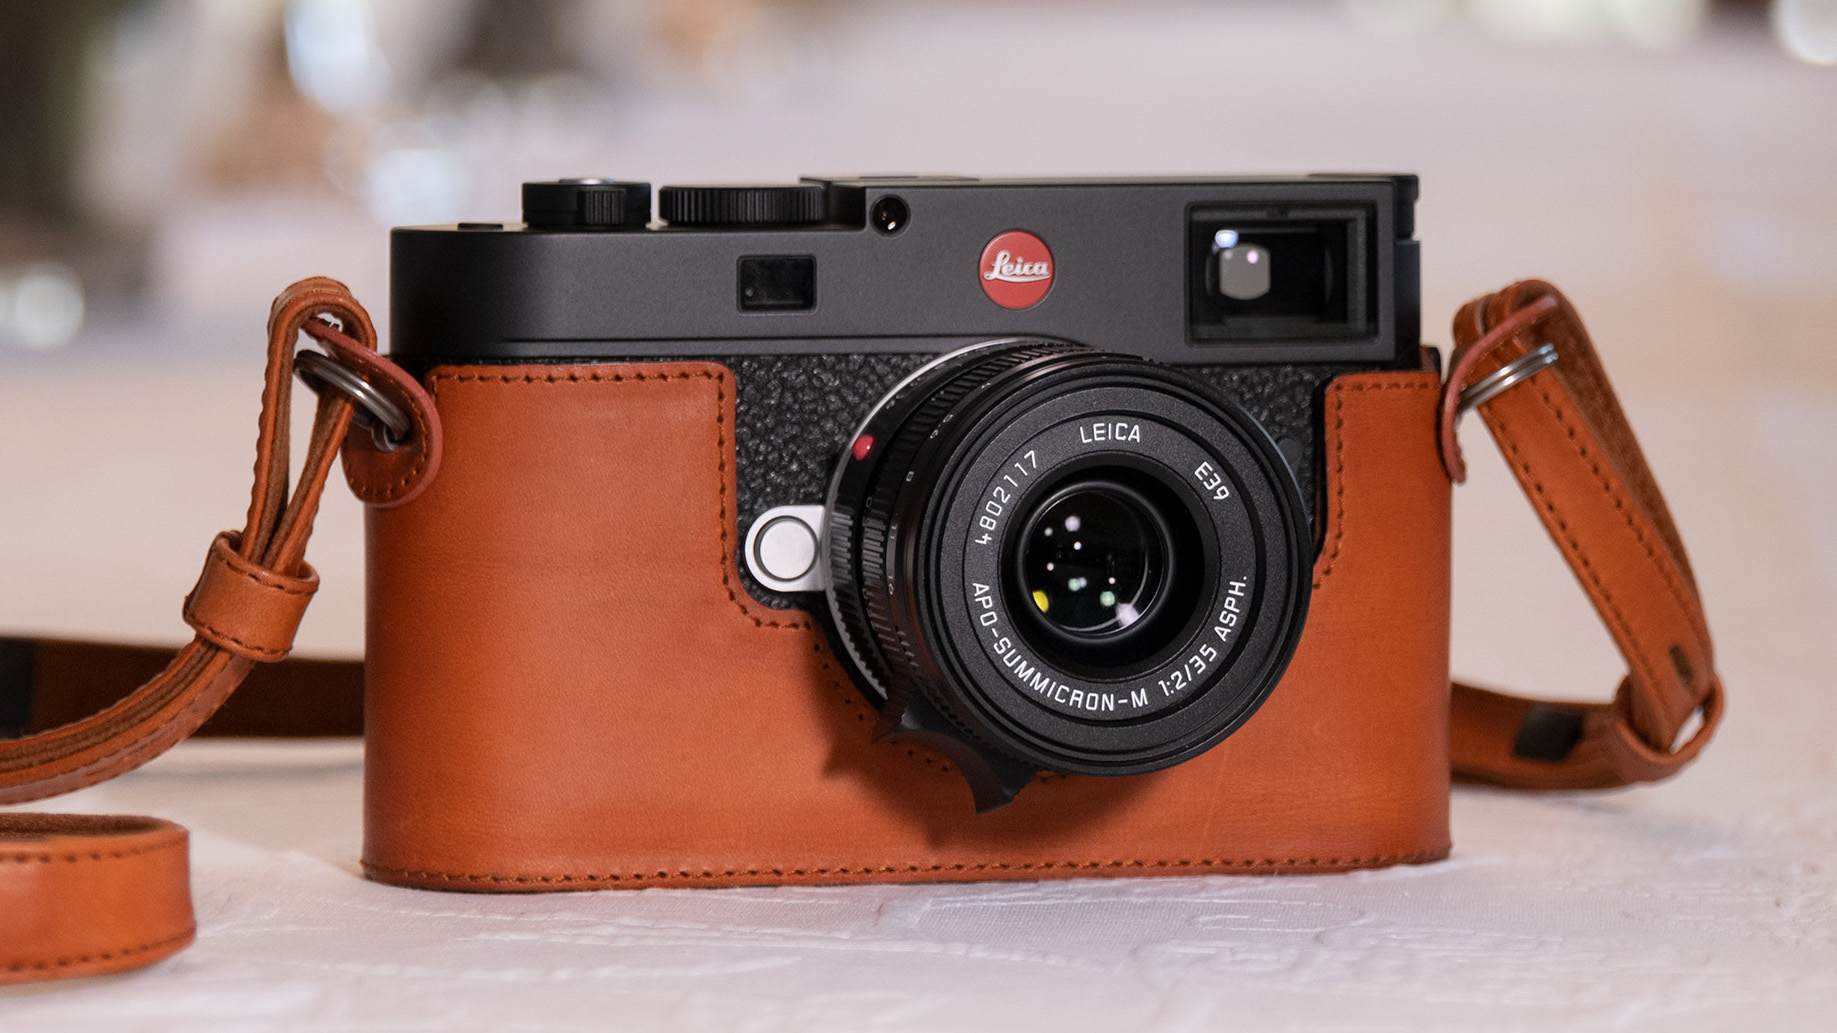 Can anyone tell me how much this is worth? It's a Leica D-Lux 3